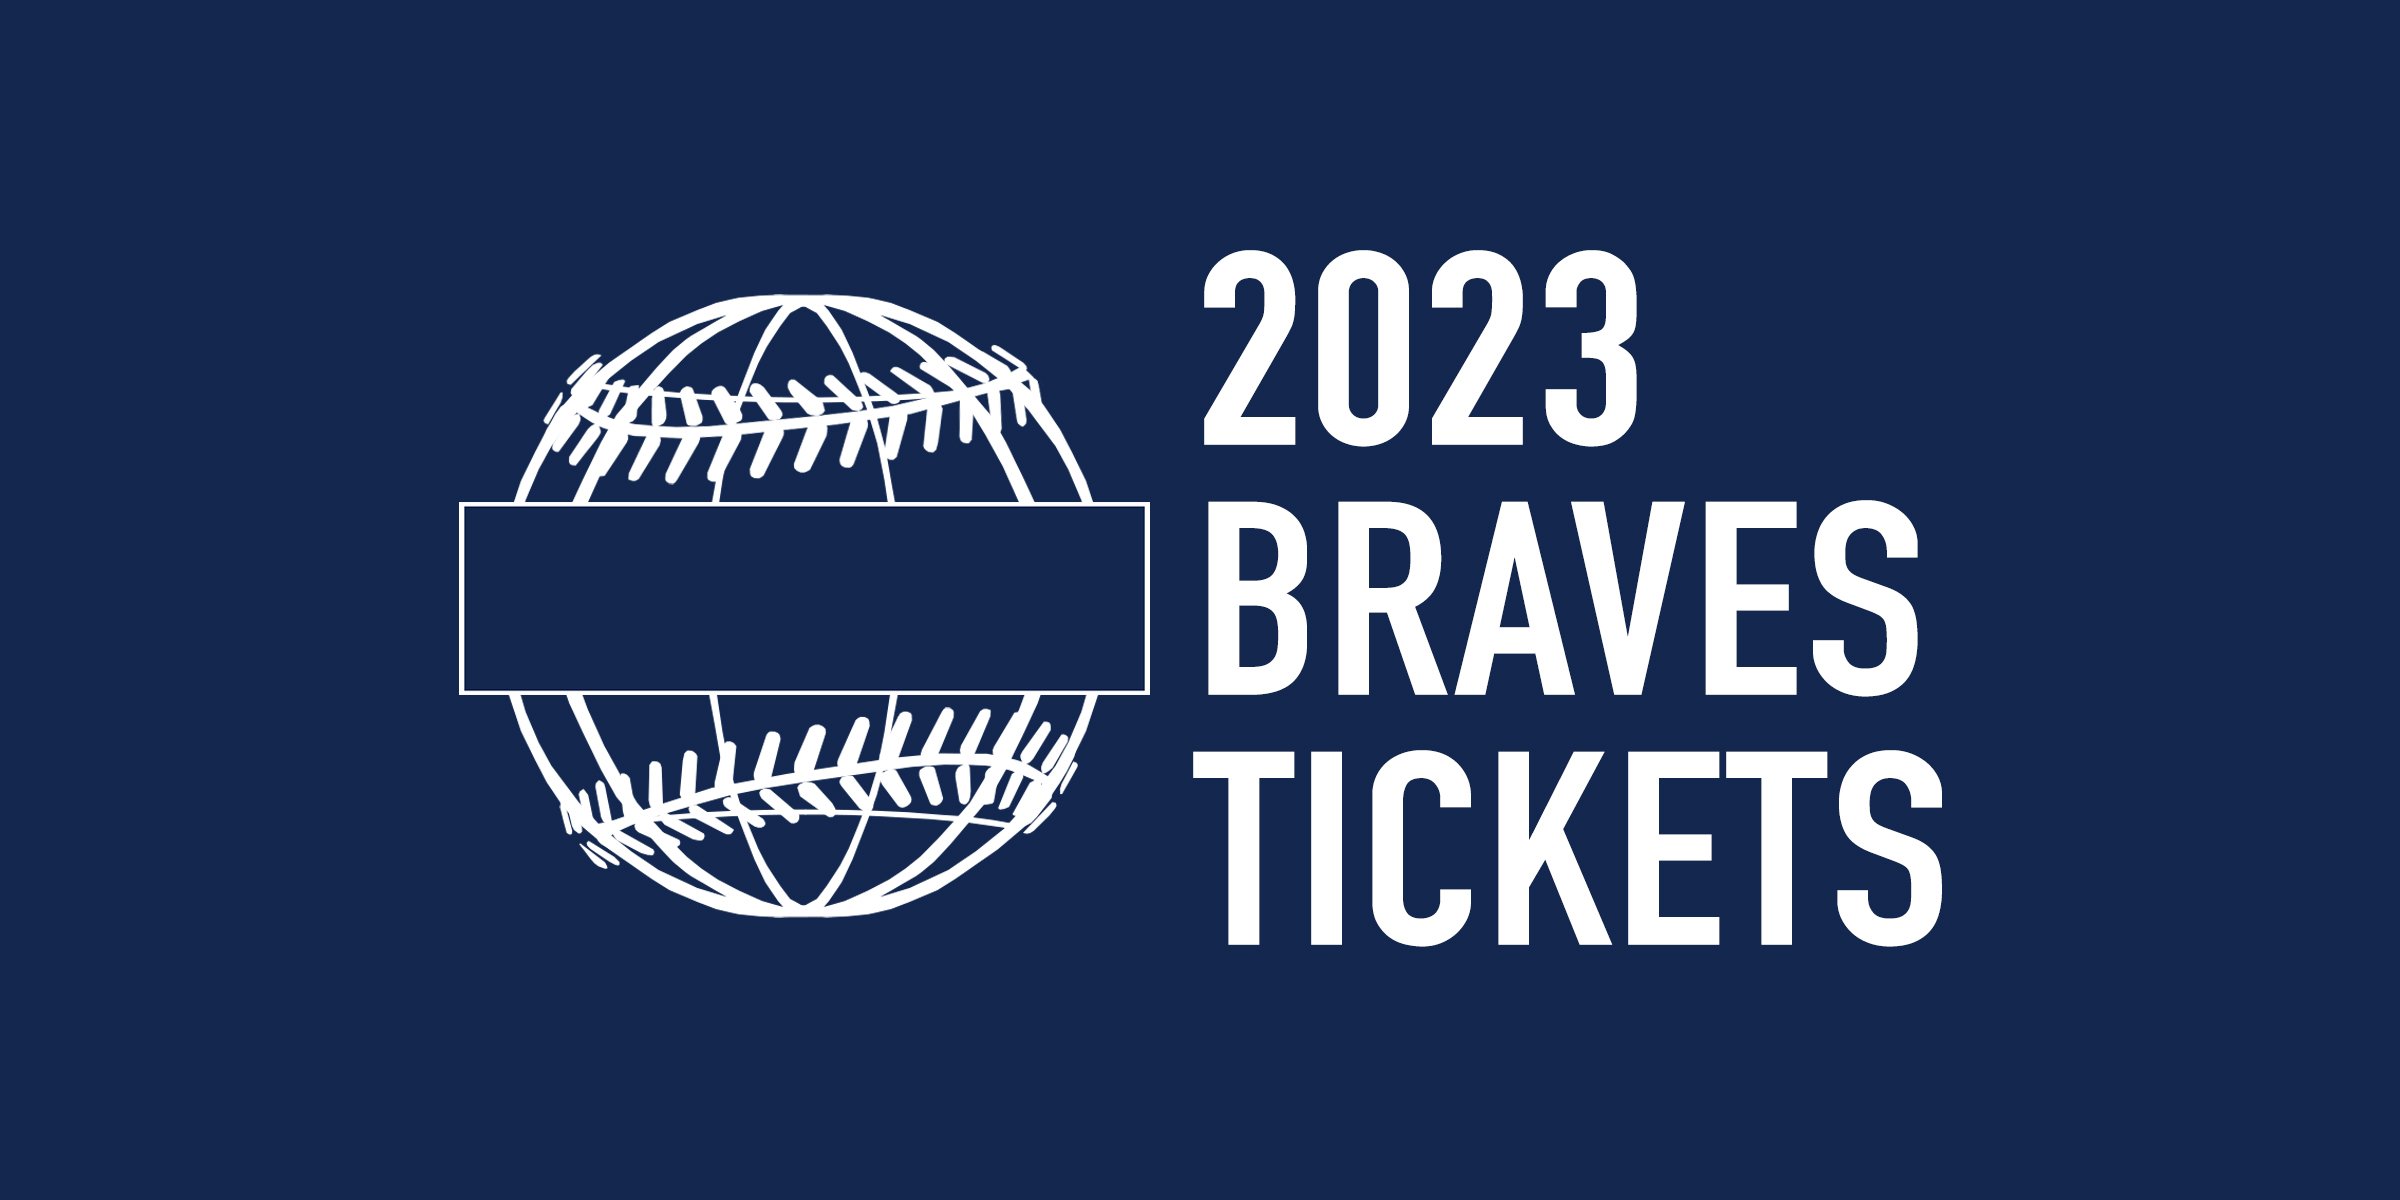 Braves list single game tickets for 2023 season for sale